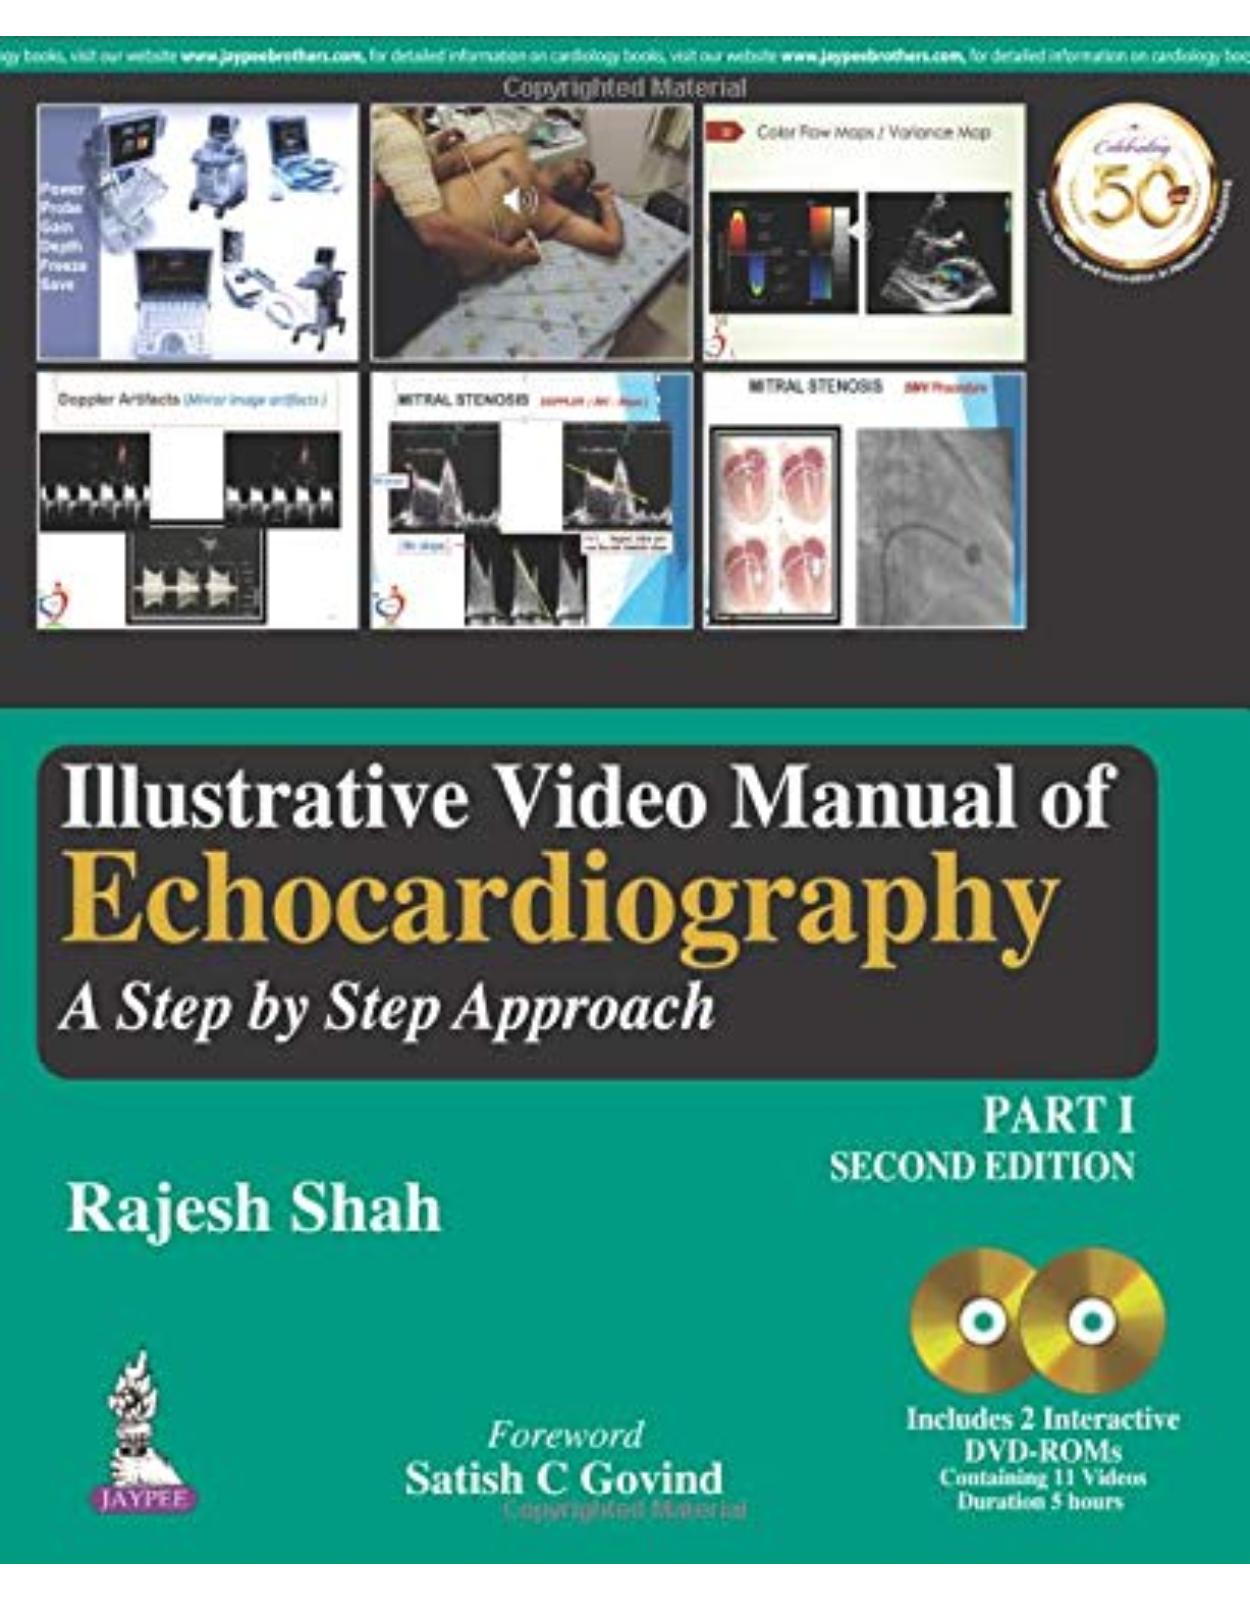 Illustrative Video Manual of Echocardiography: A Step by Step Approach  Part 1- Second Edition